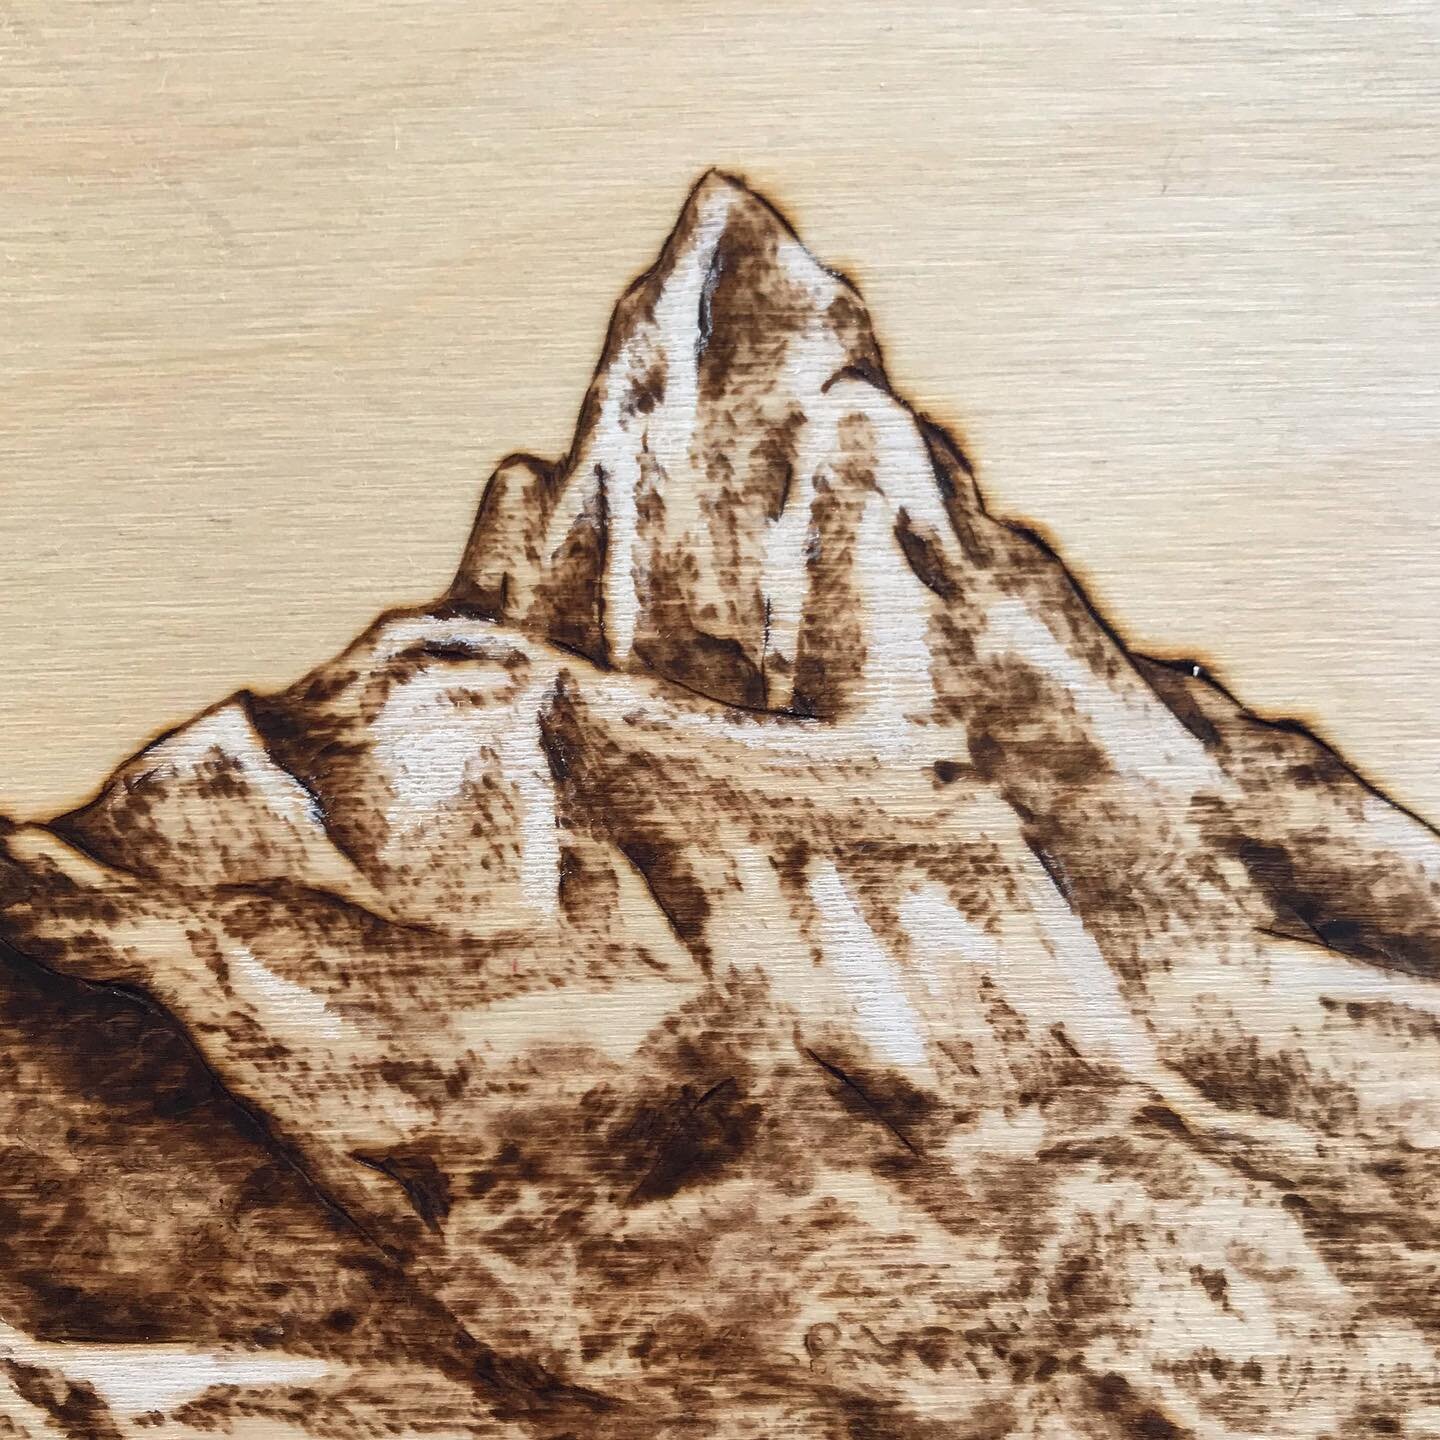 Hope. 💗⠀
Close up of the &lsquo;little sister&rsquo; in this famous mountain trio found in Canmore, Alberta. 🏔🏔🏔⠀
⠀
⠀
#pyrography #pyrographyartists #woodburning #pyro #pyrographer #artist #artistsoninstagram #ottawaartist #canadianartist #canadi